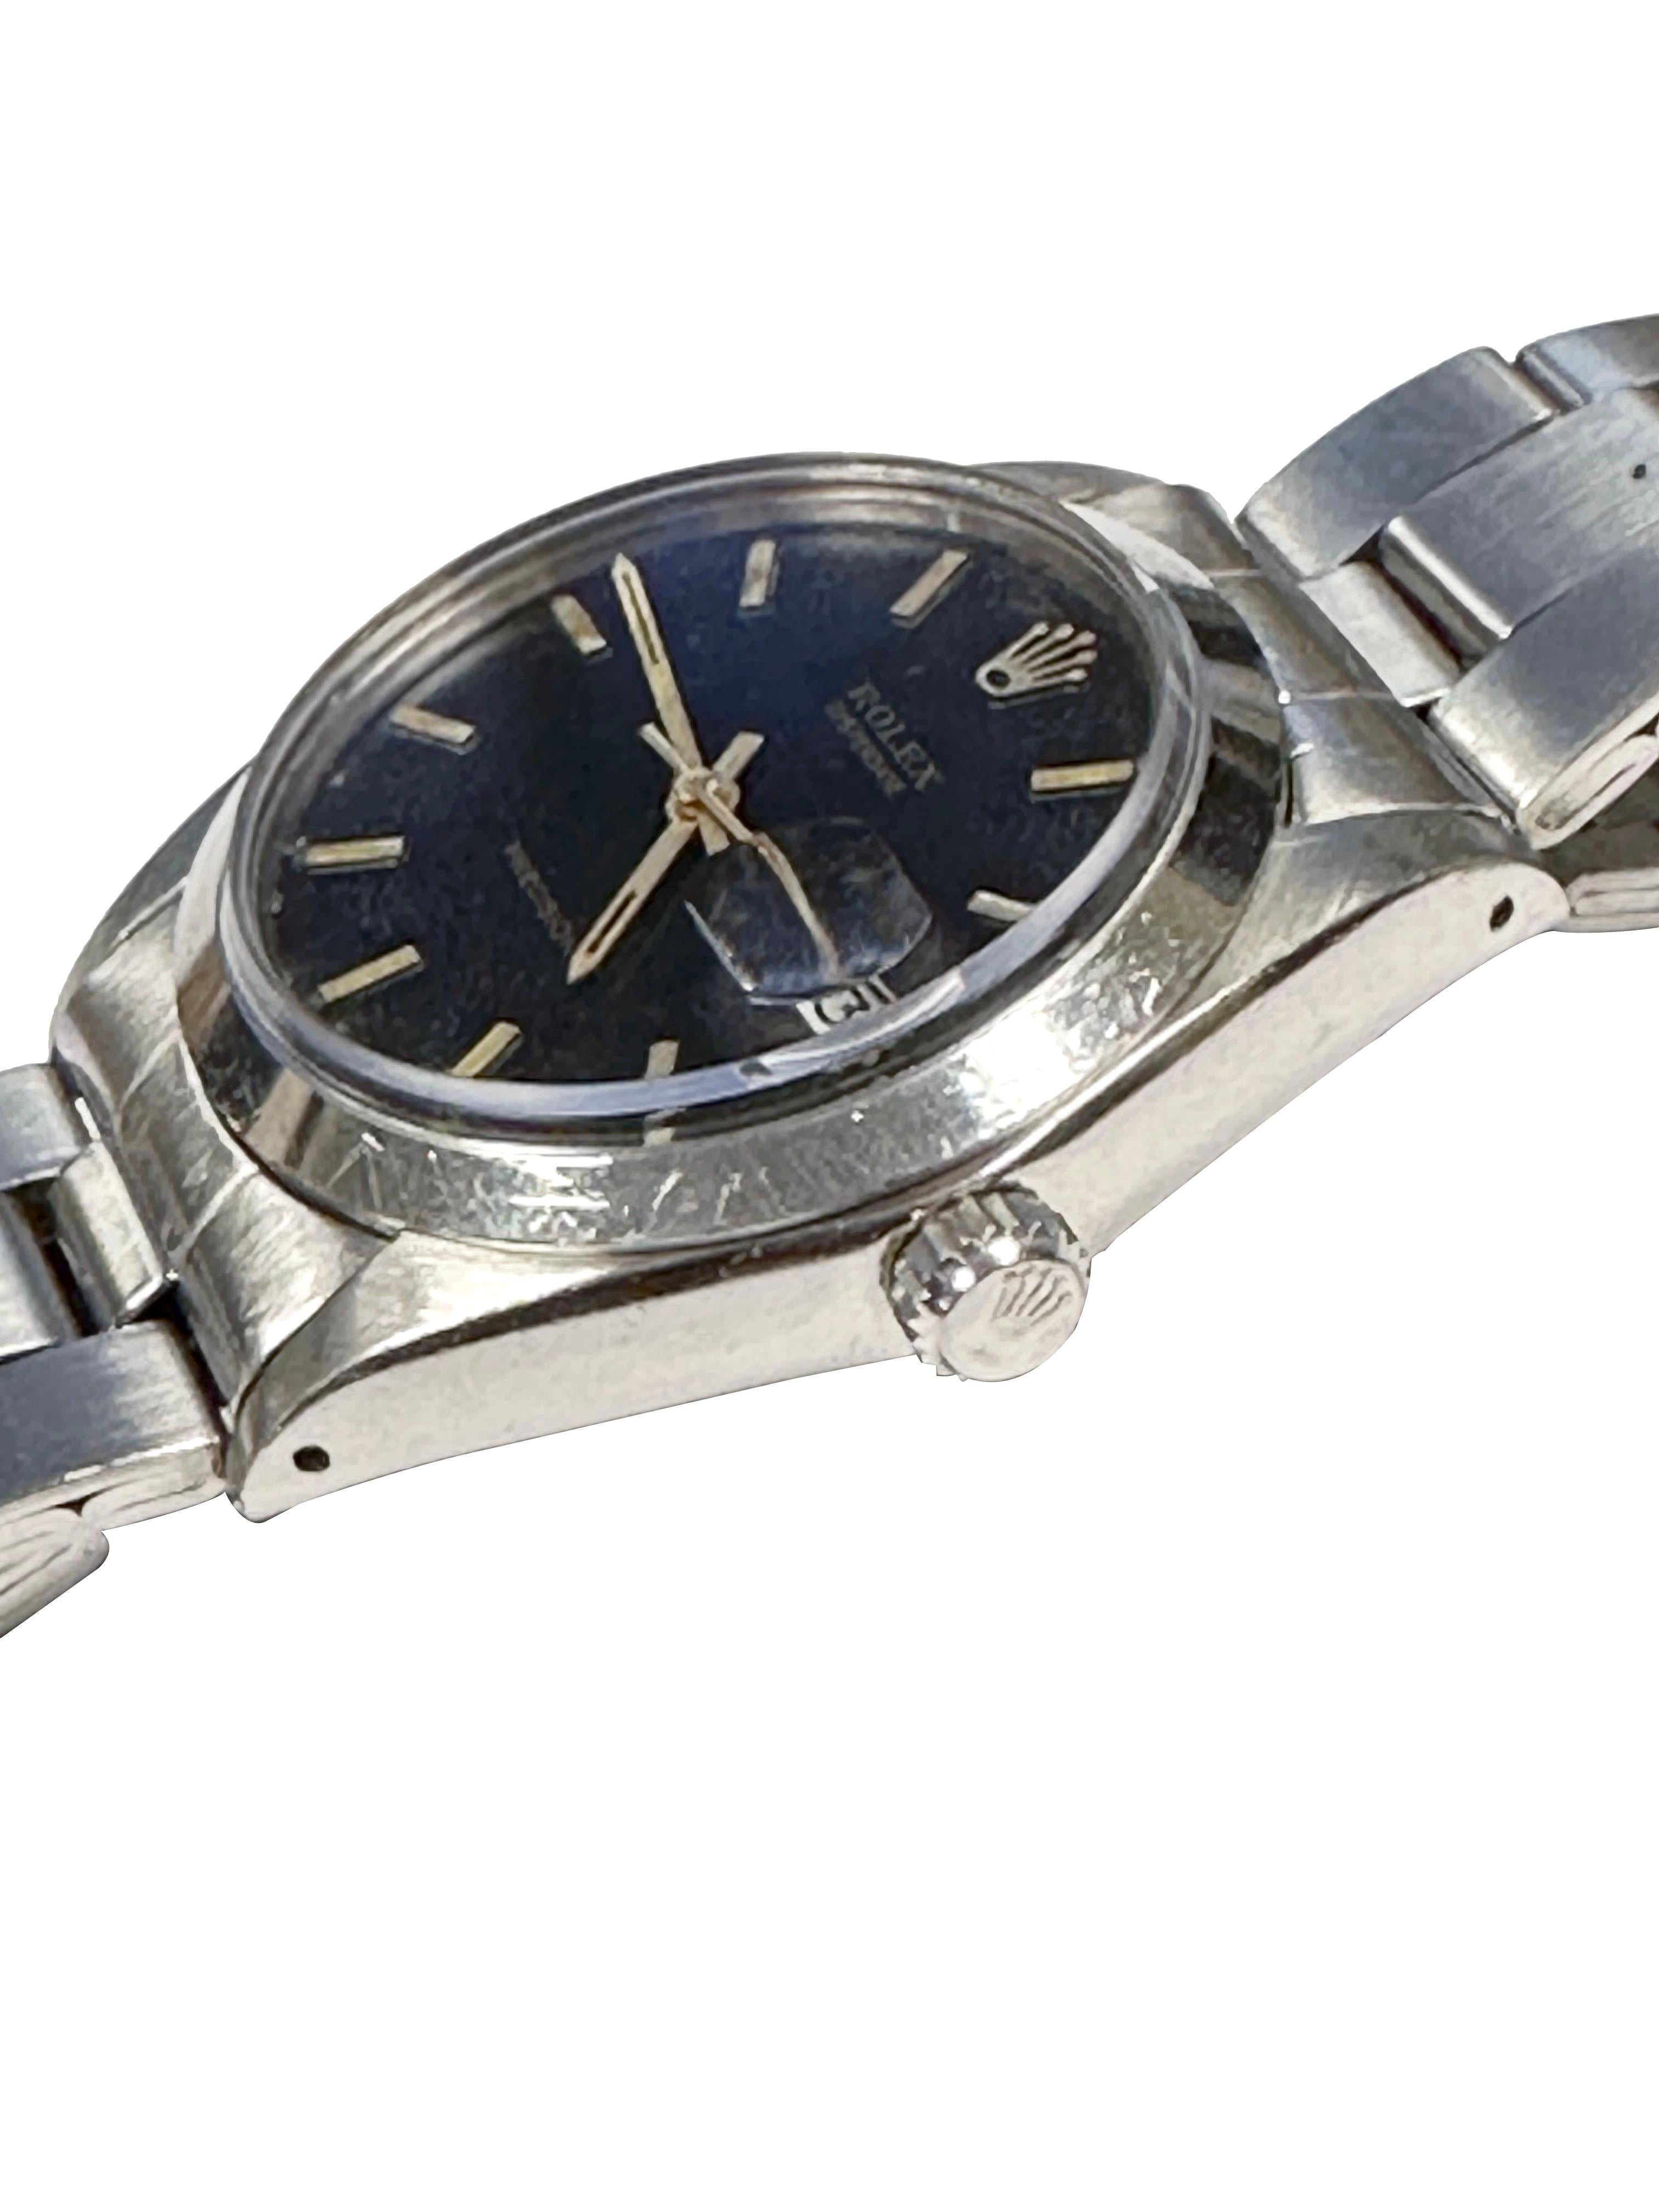 Circa 1966 Rolex Oysterdate Precision Reference 6694  Wrist Watch, 34 M.M. Stainless Steel 3 piece Oyster Case, 17 Jewel Caliber 1225 Manual wind movement, Original Black dial with raised Gold markers, Gold hands including a sweep seconds hand and a